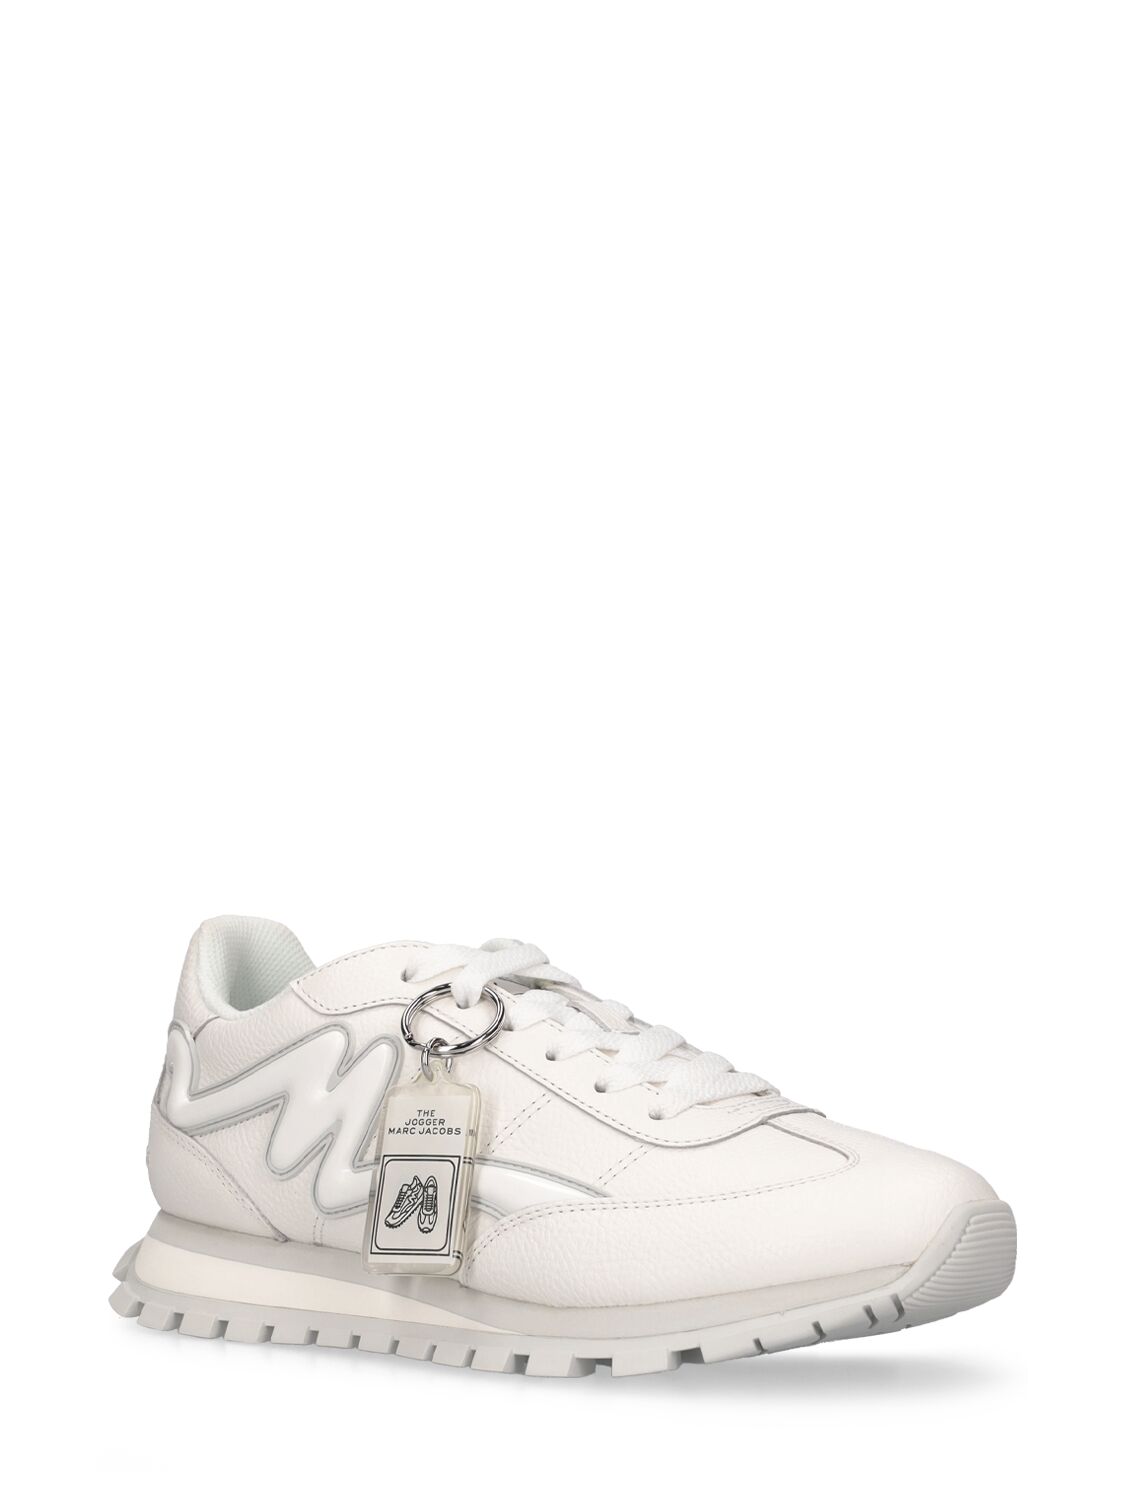 Shop Marc Jacobs The Leather Jogger Sneakers In White